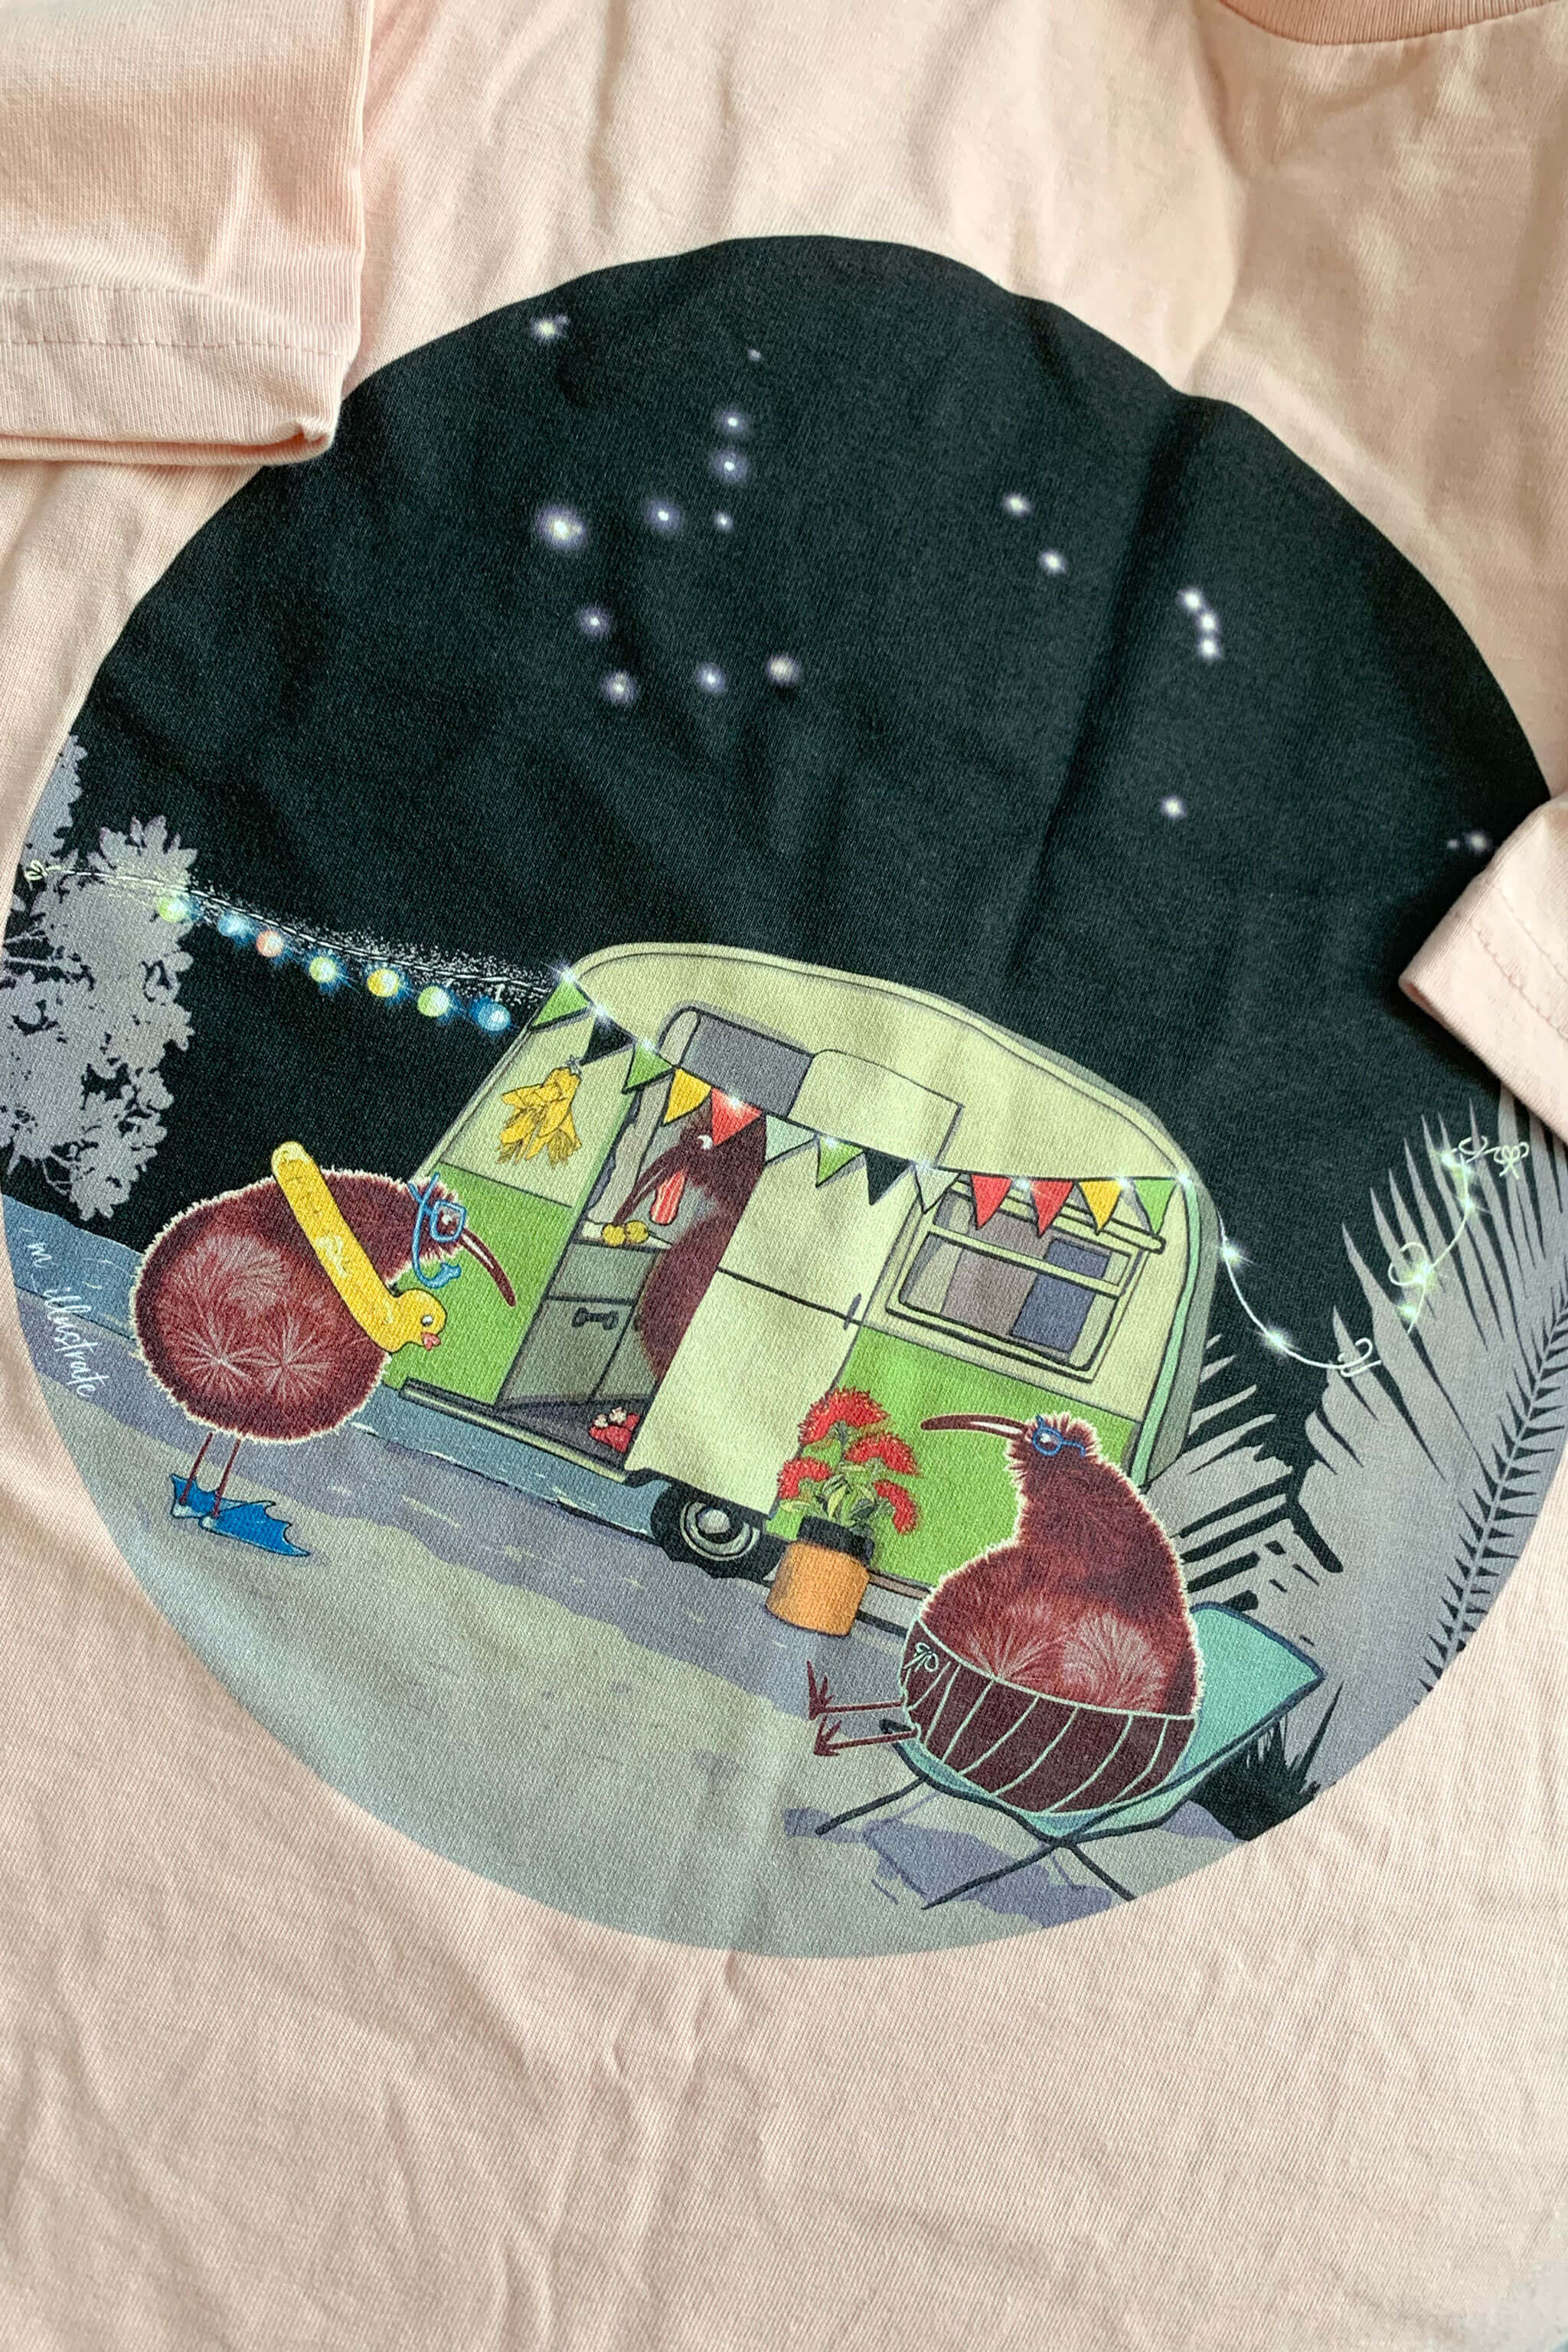 Kiwi Style Summer Camping tee - Limited Edition of 50 M_ILLUSTRATE